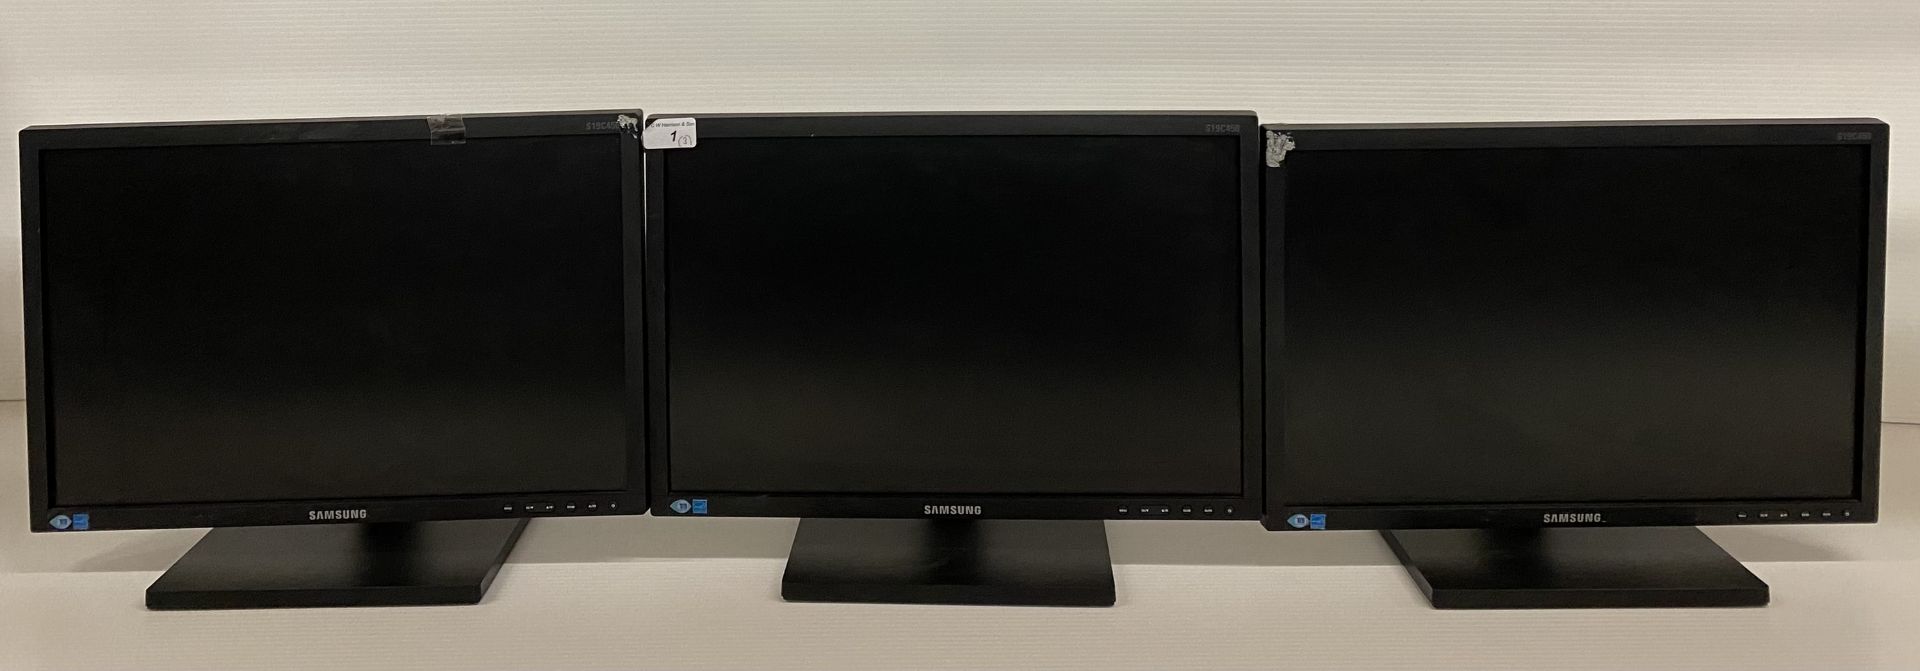 3 x Samsung S19C450 19" Height Adjustable Monitors - No Power Leads